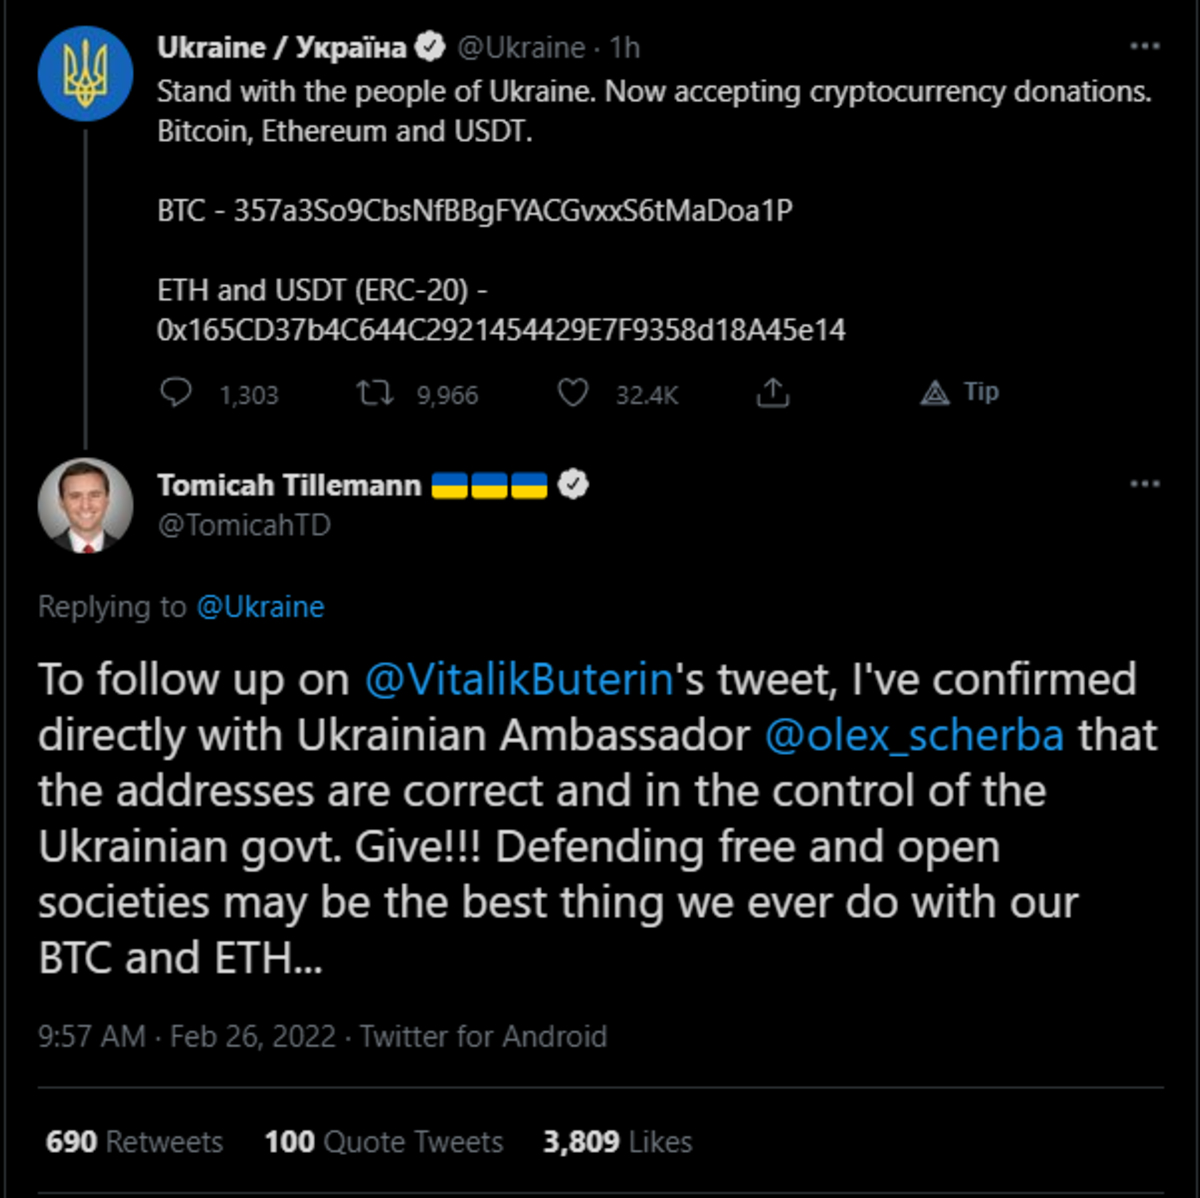 As the conflict between Ukraine and Russia propels social media reports and donations made in bitcoin, it underscores our decentralizing world.